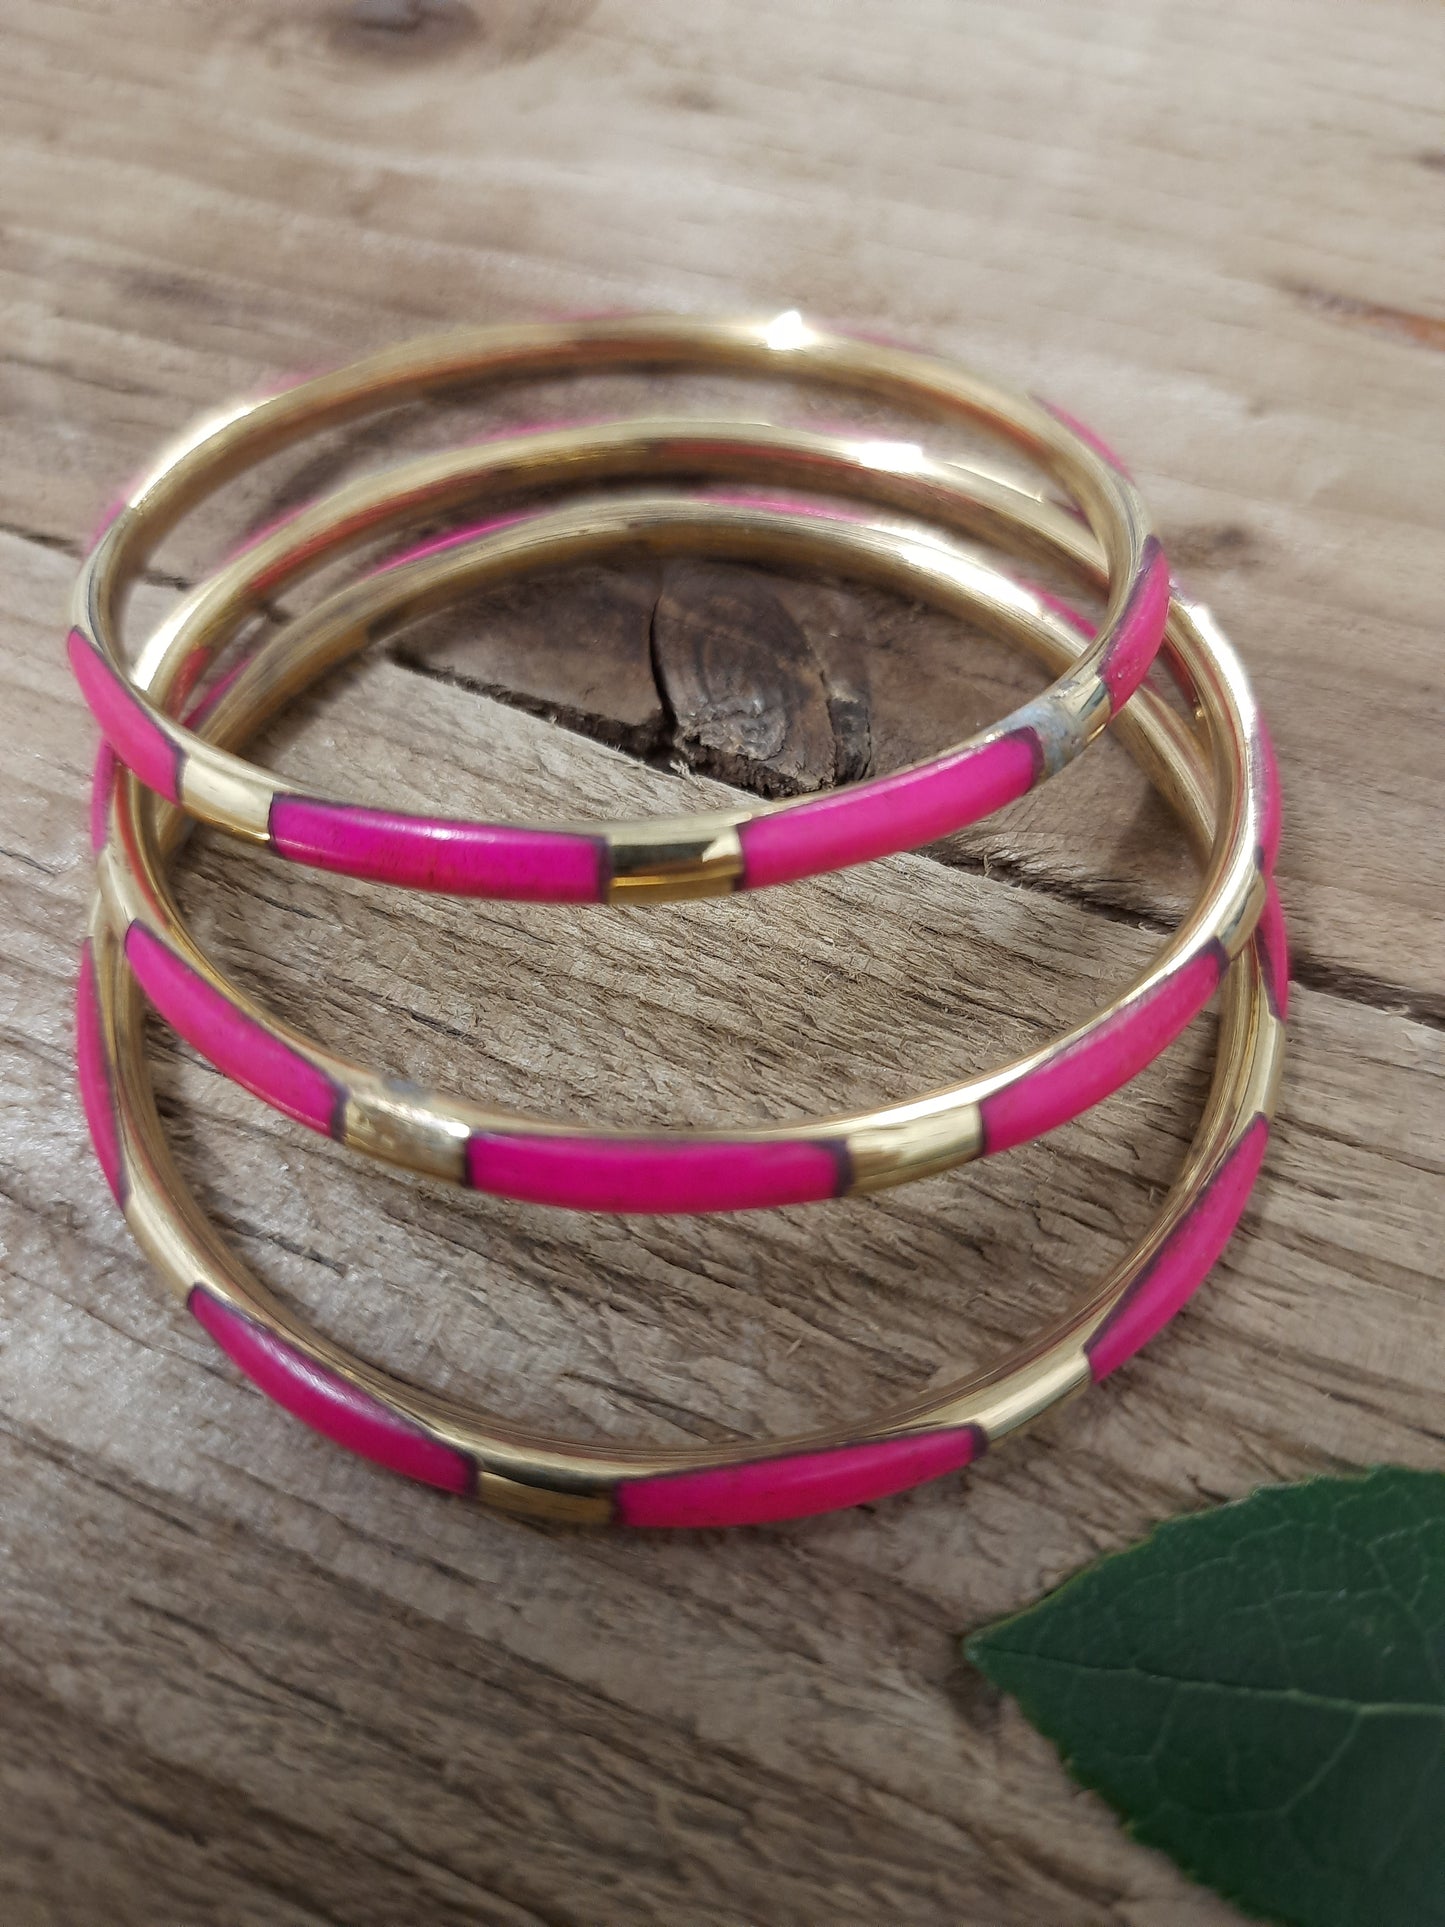 Fair Trade Jewelry | Spectacular Bangles | 3 Set | Ethical Gifts | Striking Quality